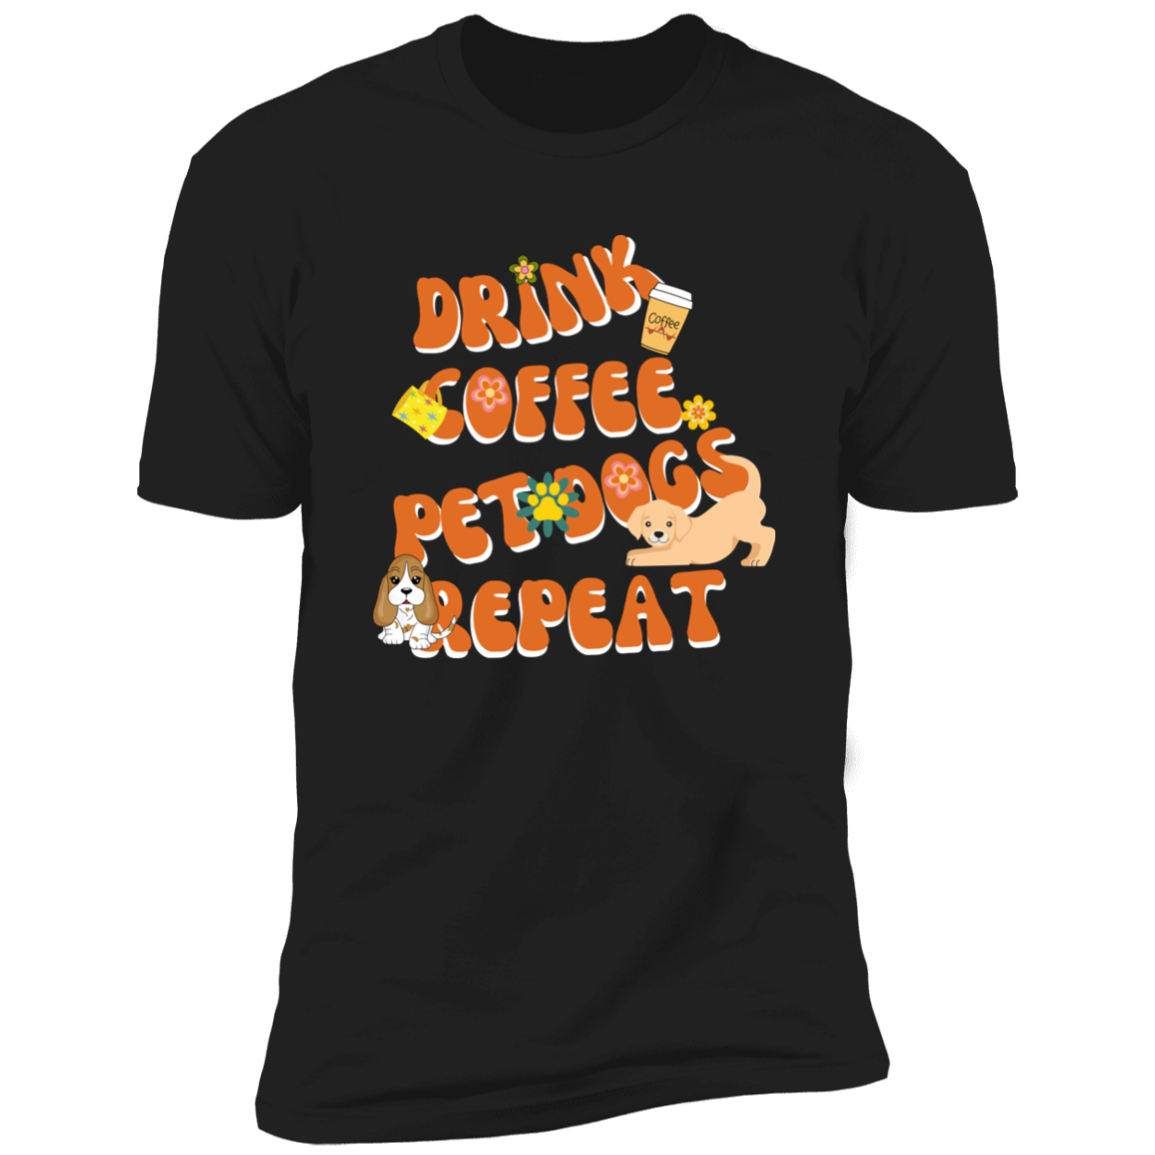 Drink Coffee Pet dogs repeat dog  Shirt, funny dog shirt for humans, dog mom and dog dad shirt, in black